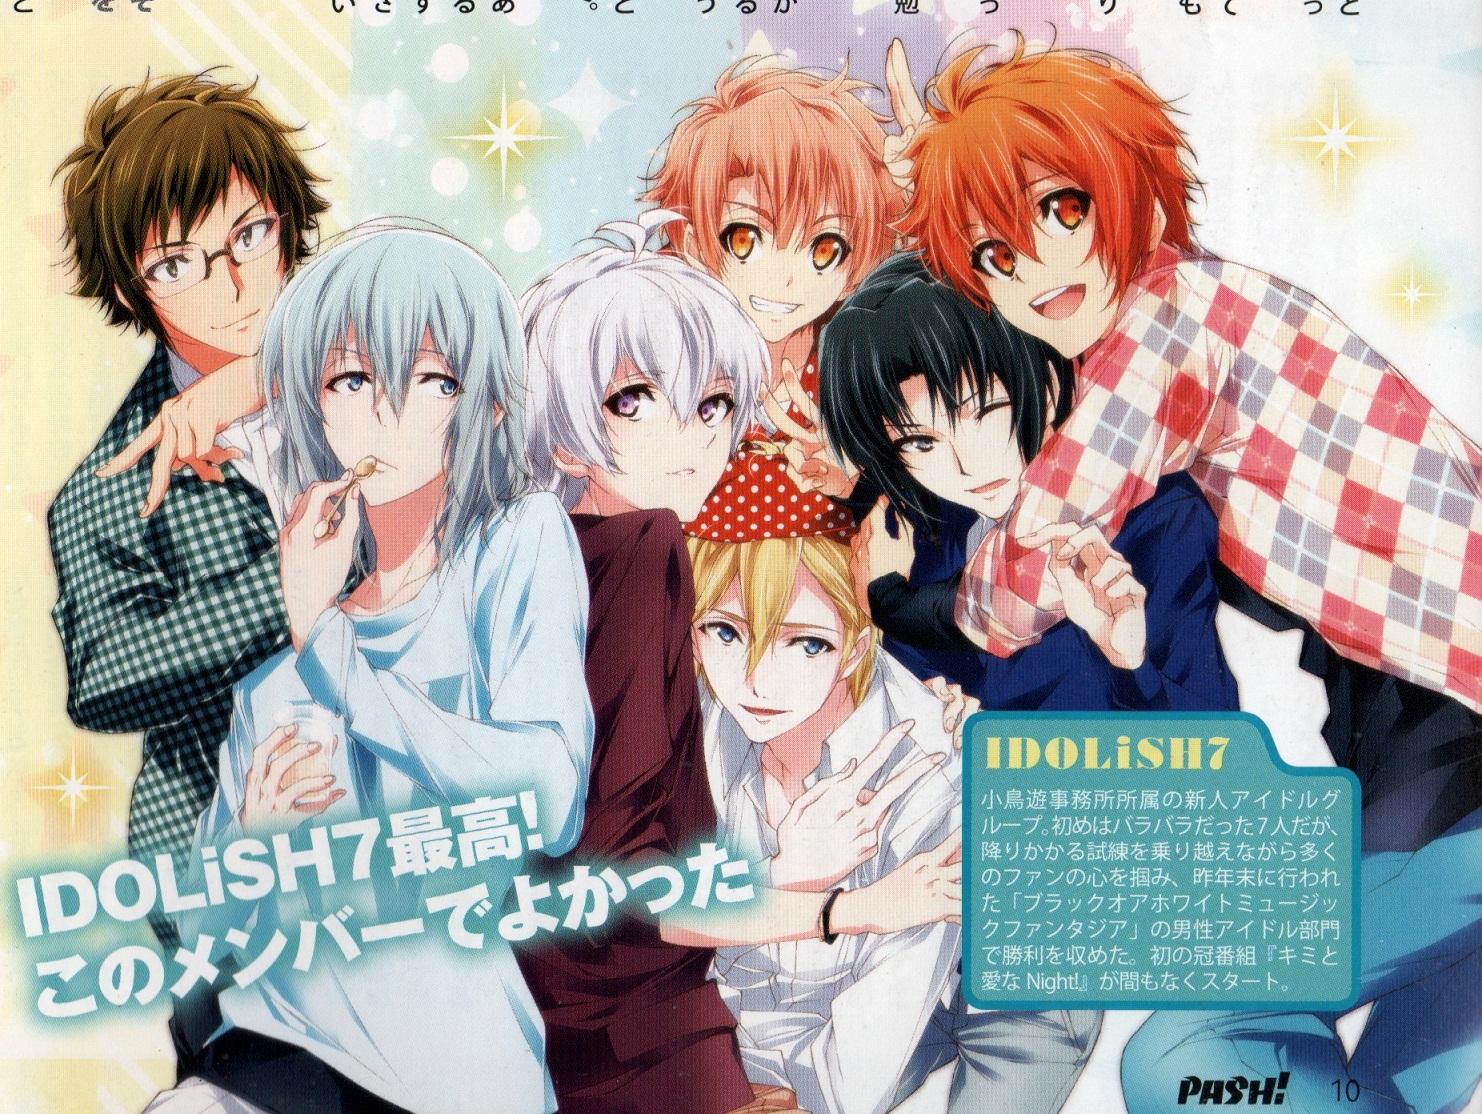 IDOLiSH7 and Scan Gallery